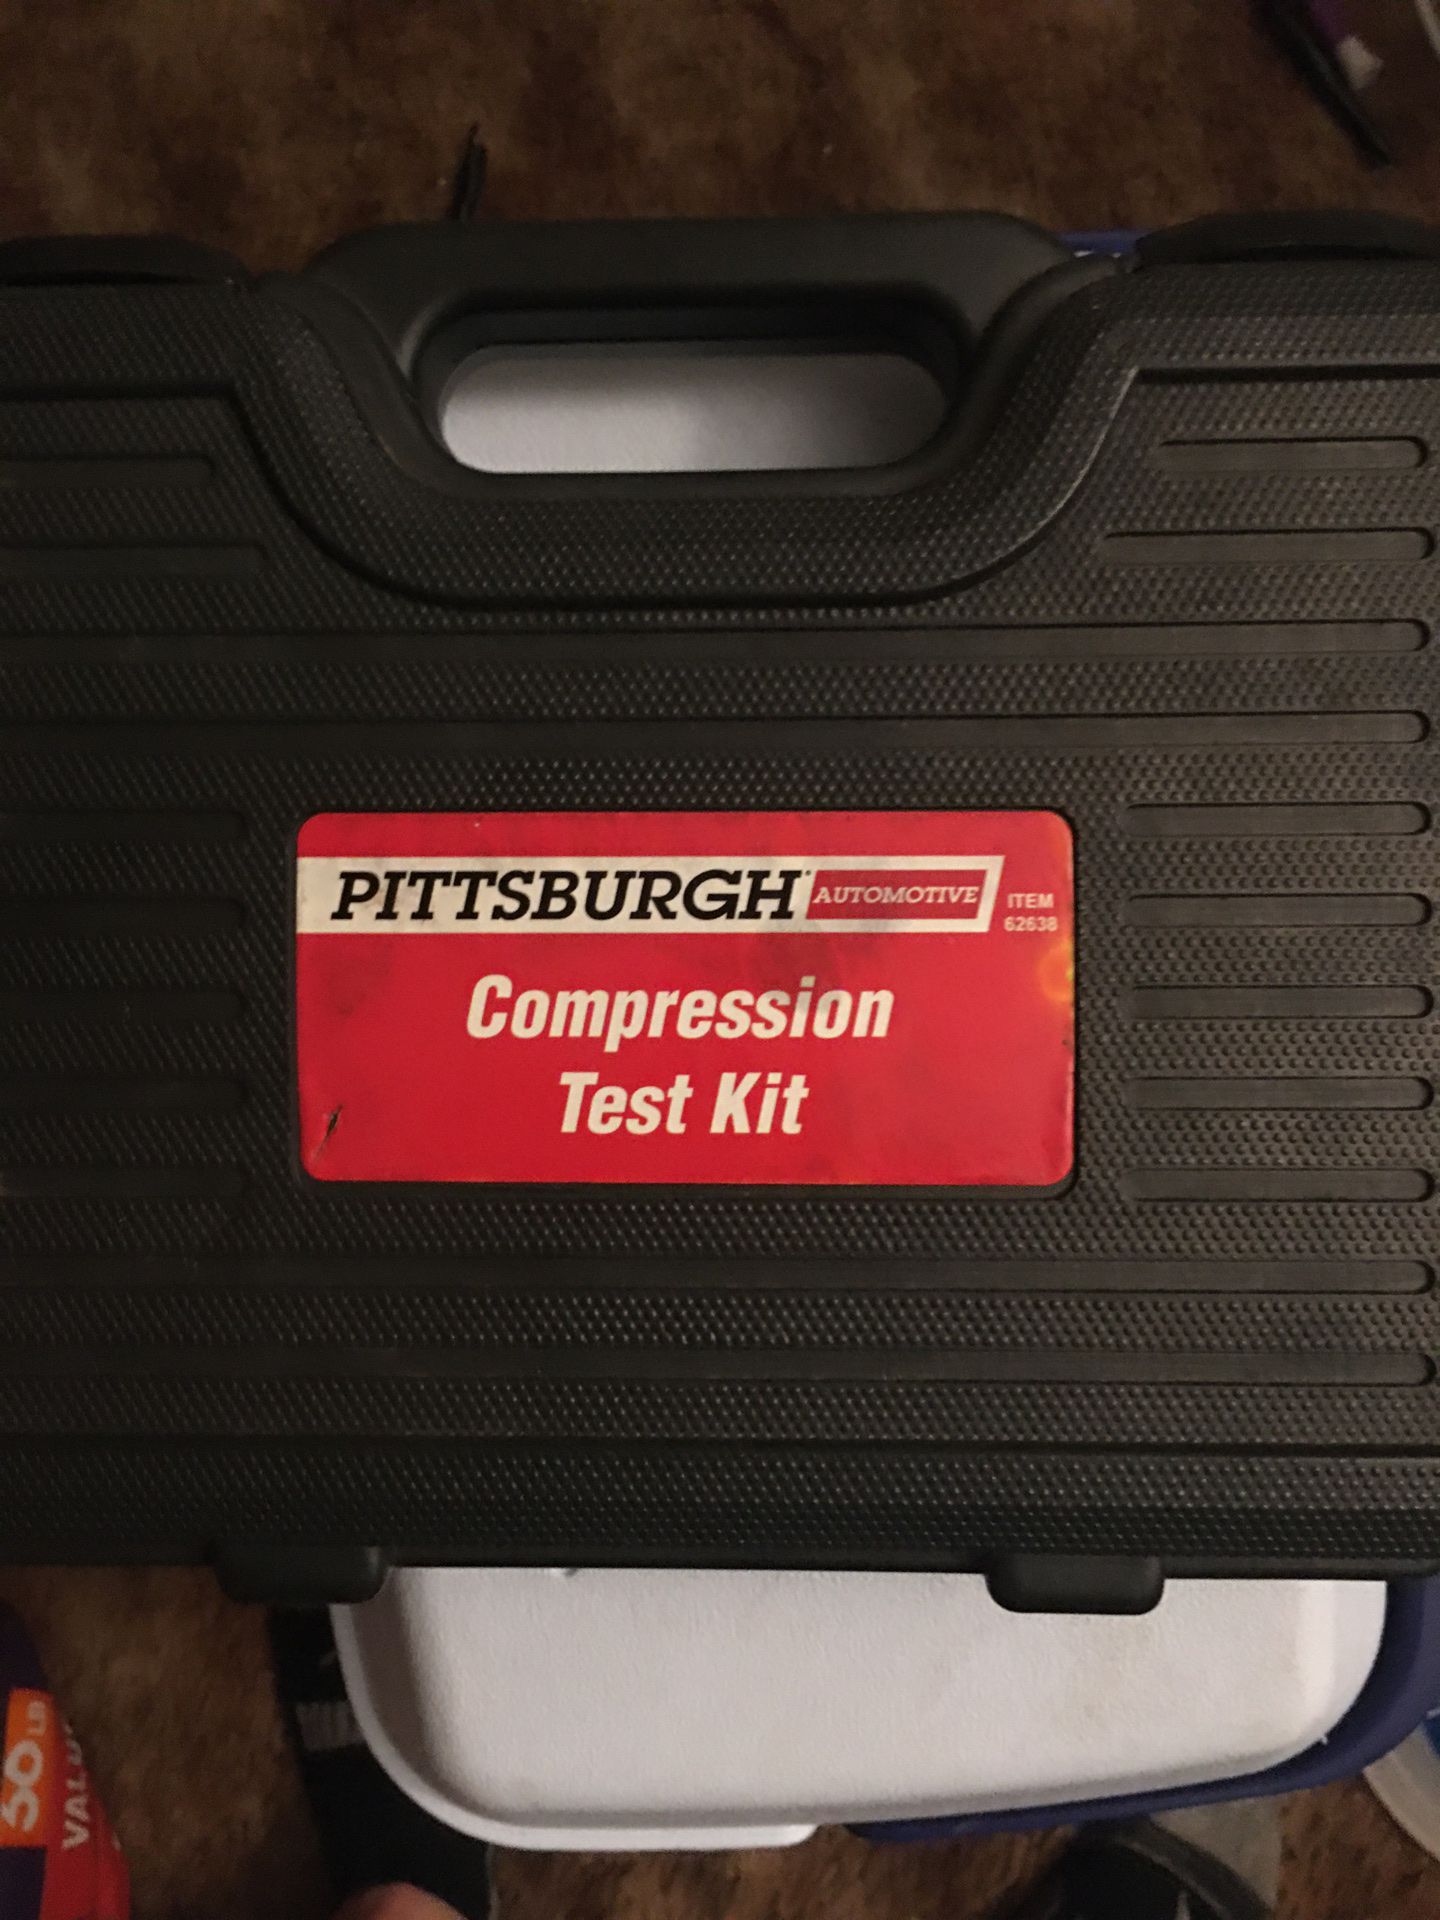 Pittsburgh compression test kit